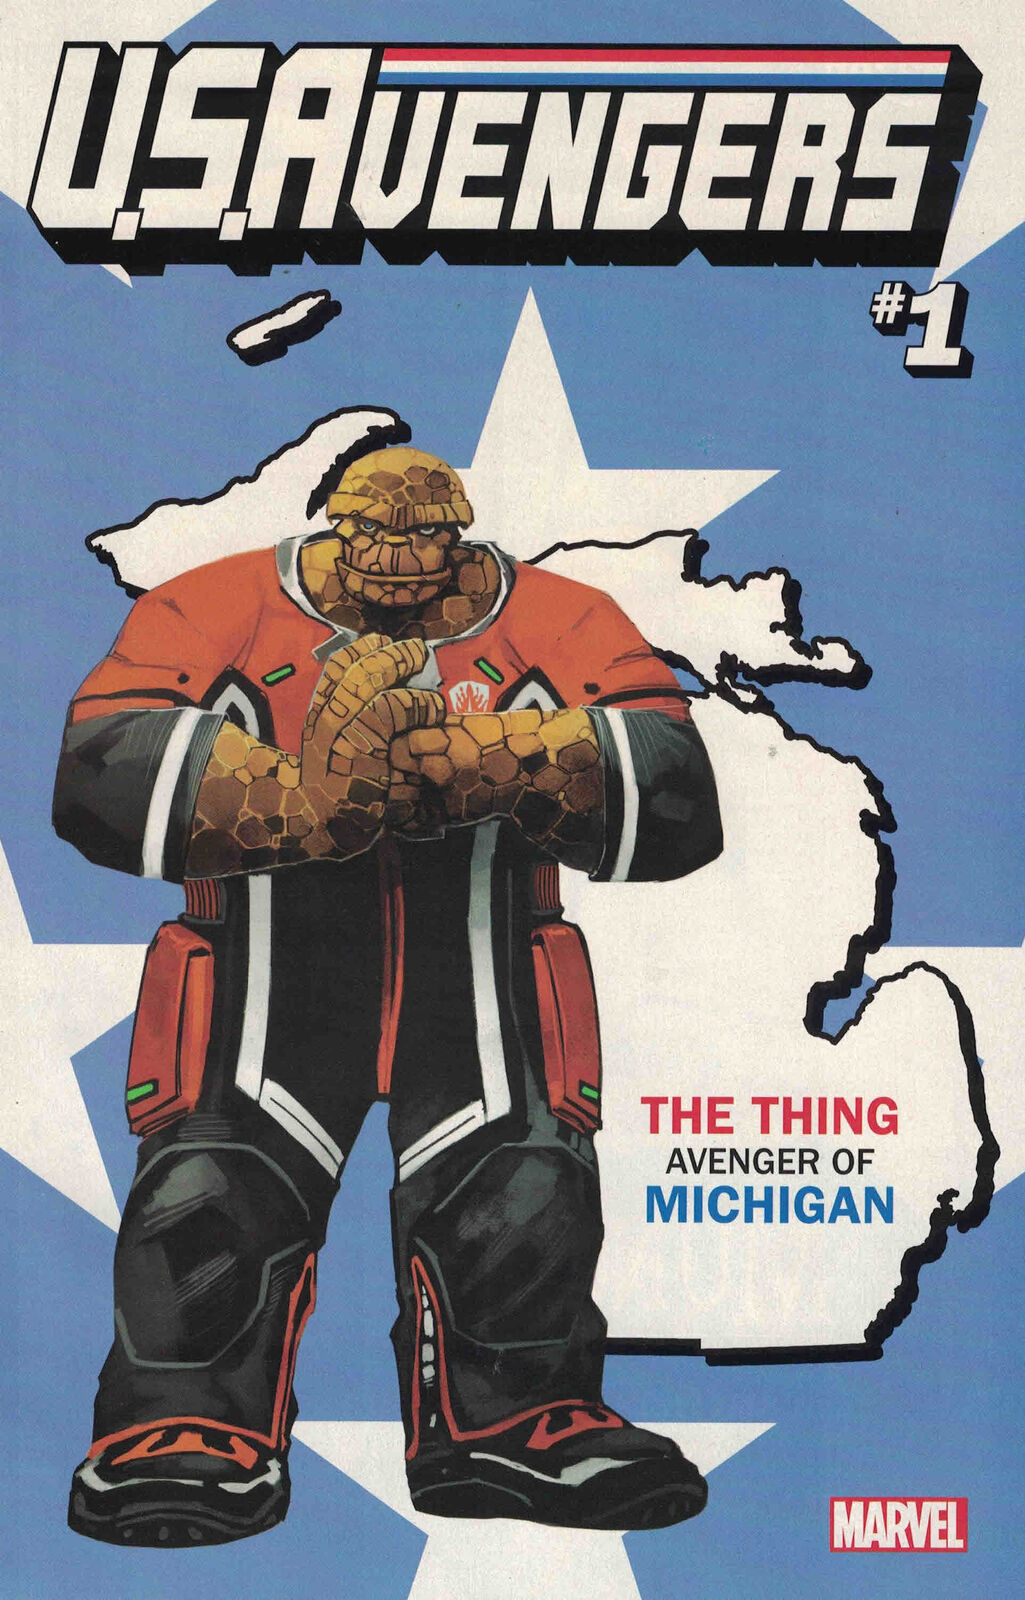 US AVENGERS #1 THE THING MICHIGAN VARIANT 2017